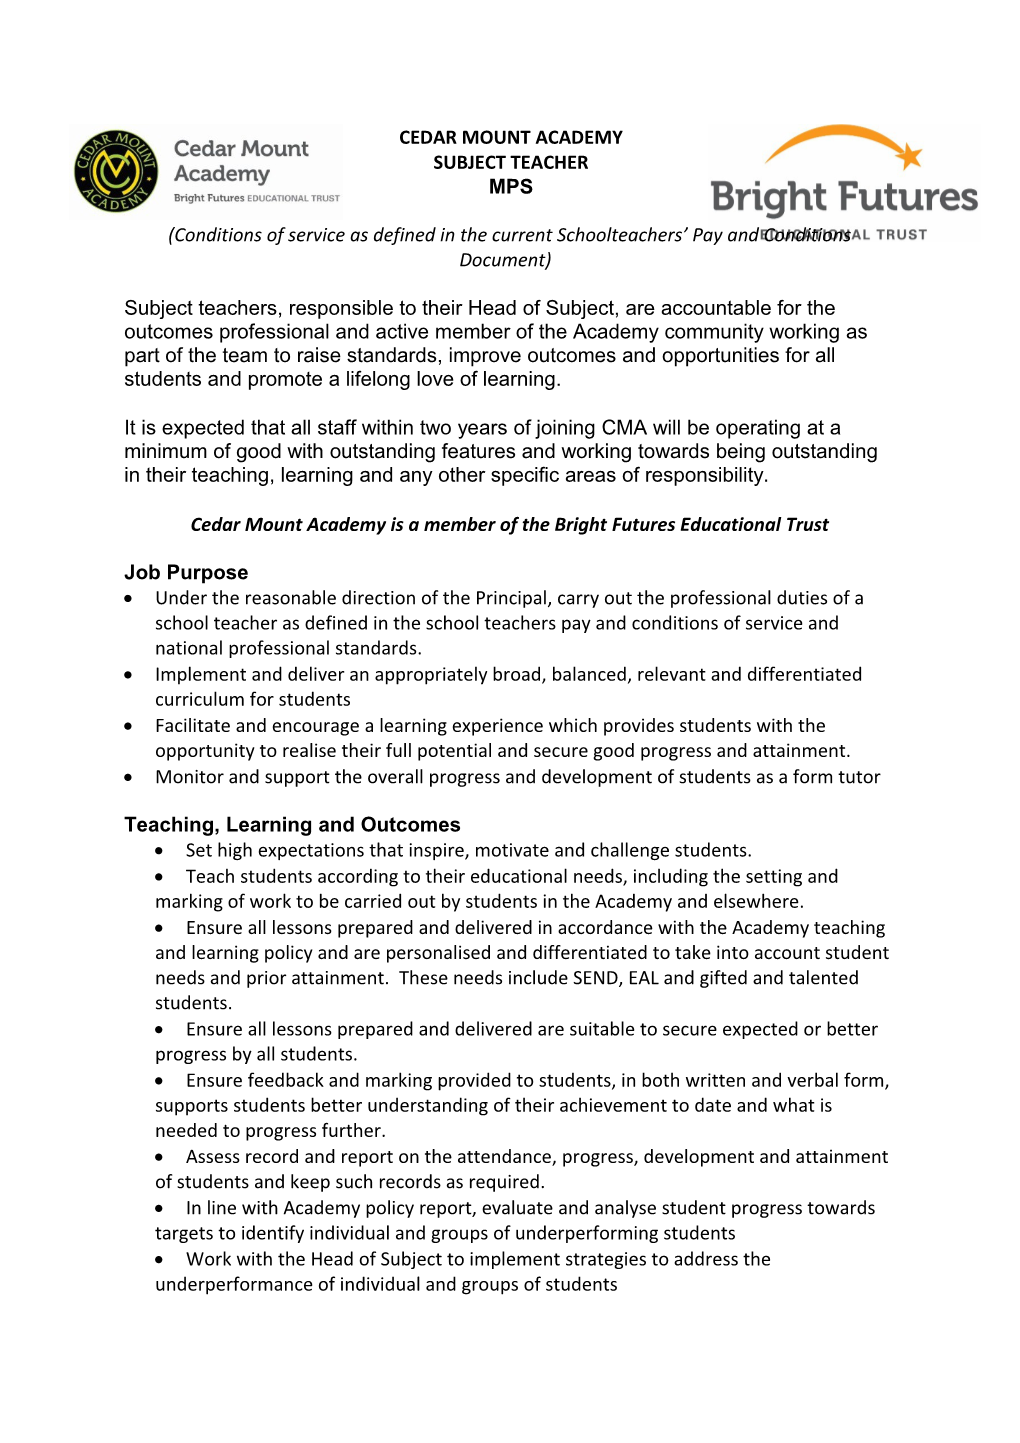 Conditions of Service As Defined in the Current Schoolteachers Pay and Conditions Document